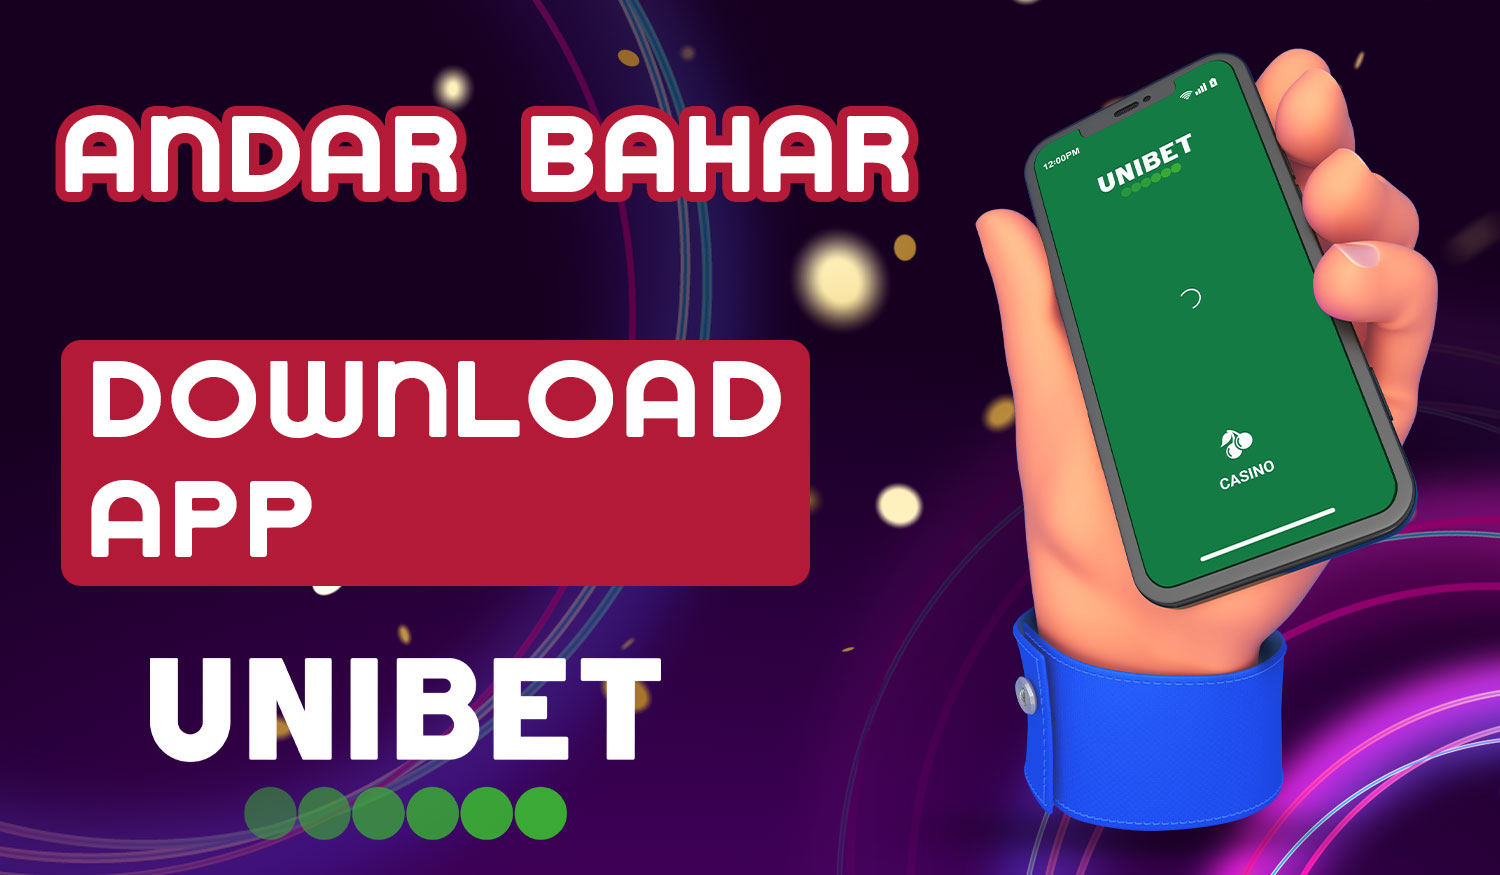 A detailed guide for Indian players on how to download and install the mobile application "Unibet Casino" and enjoy playing Andar Bahar